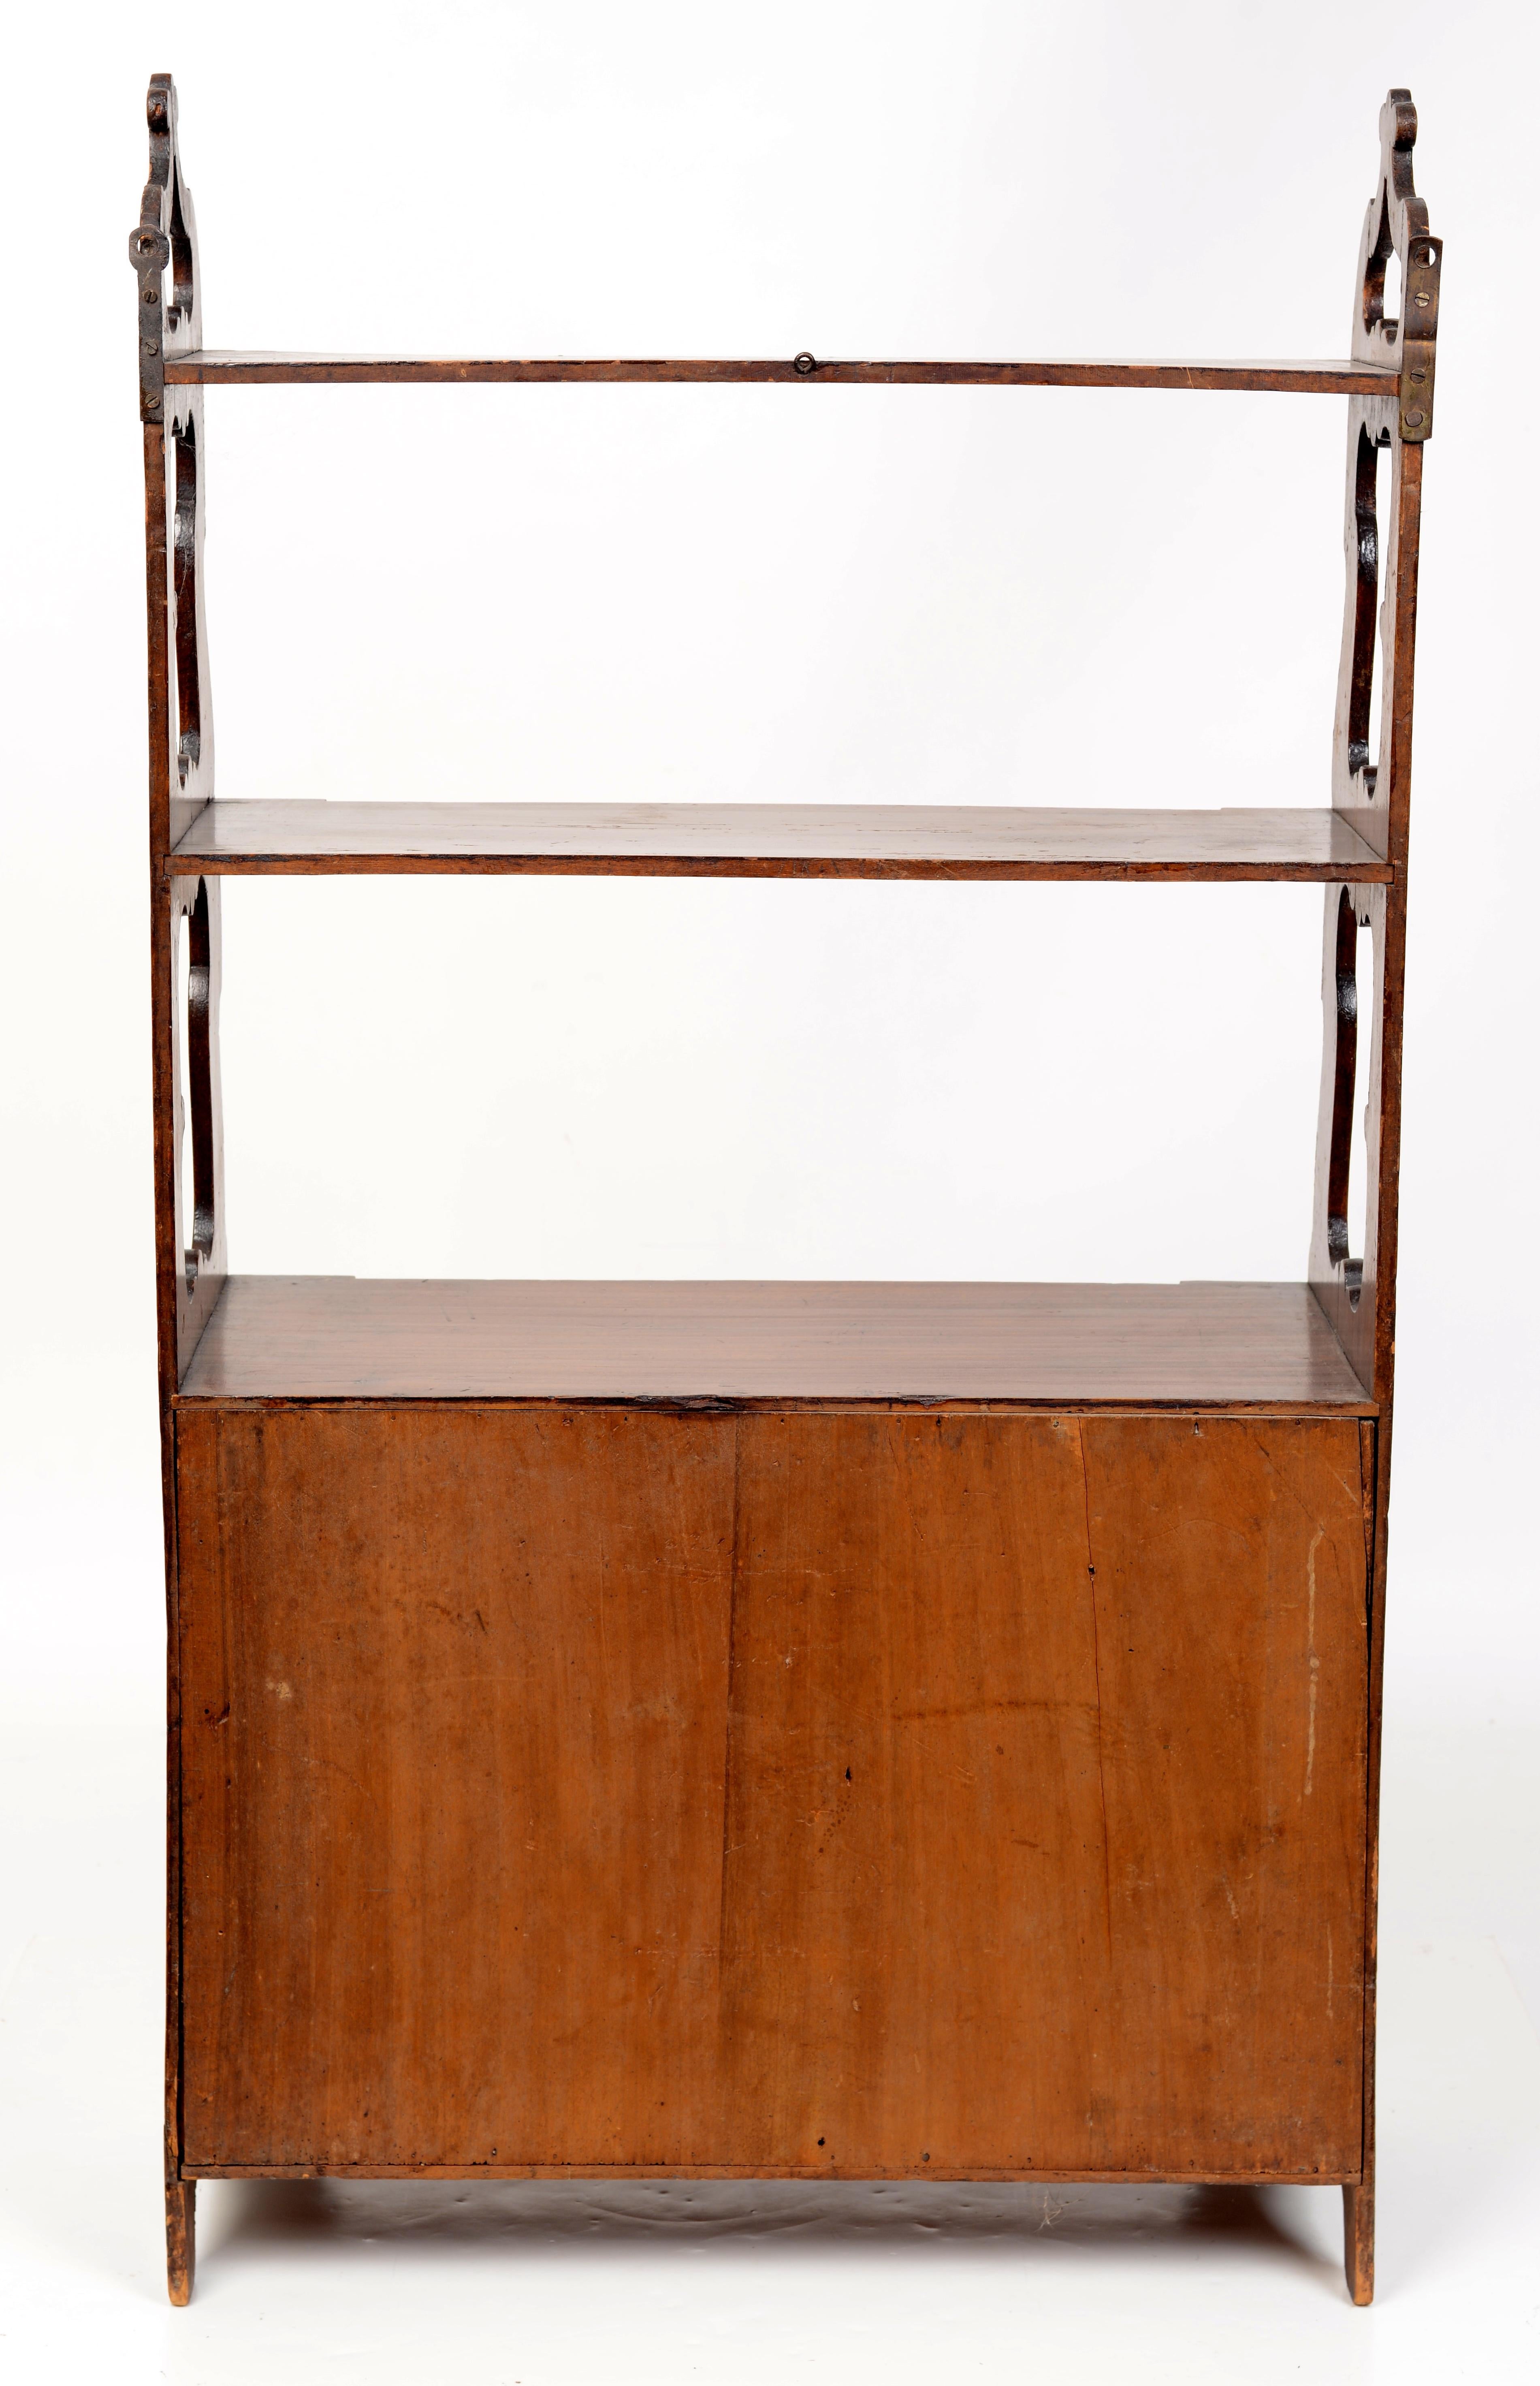 Early 19th Century Louis XVI Provincial Wall Shelf, 3 Shelves Over A Tambour Fronted Lower Cabinet  For Sale